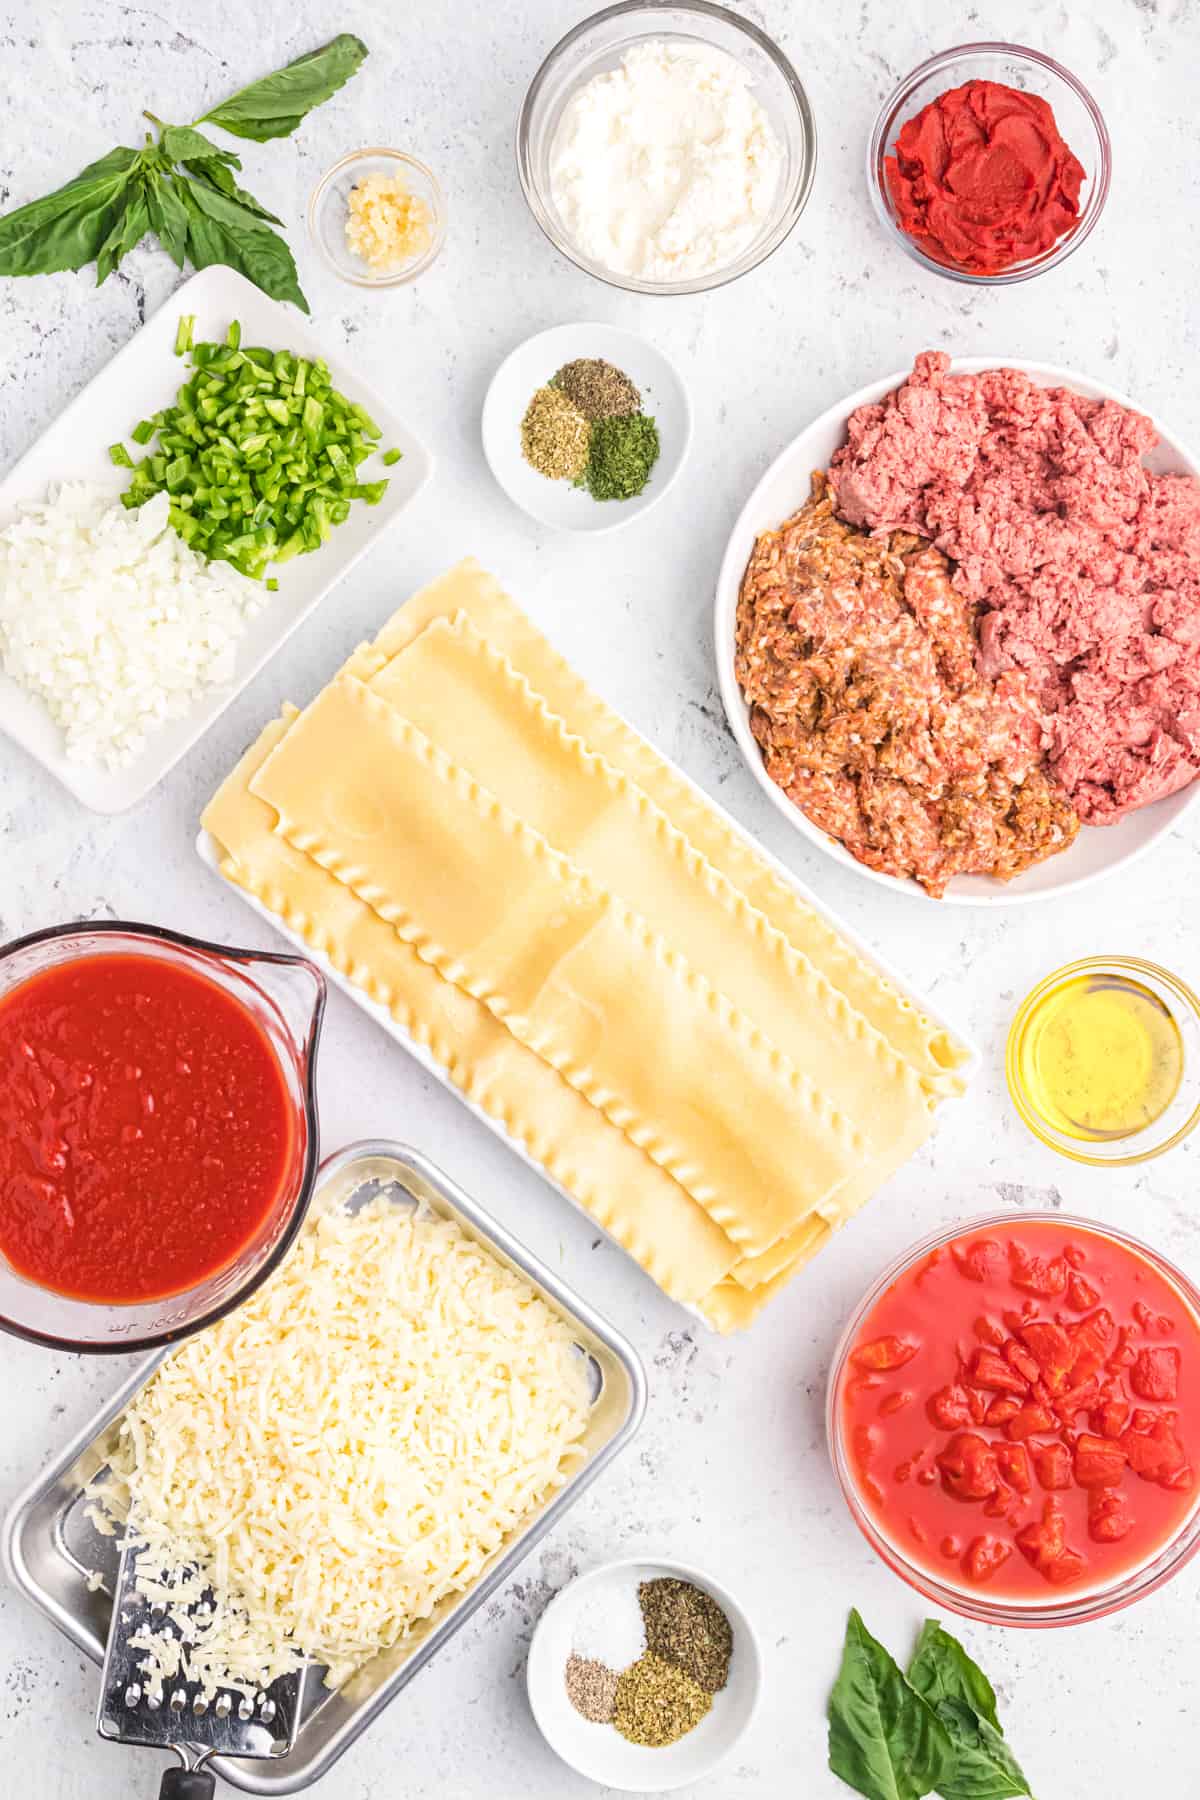 The ingredients for lasagna rollups are placed on a white surface.